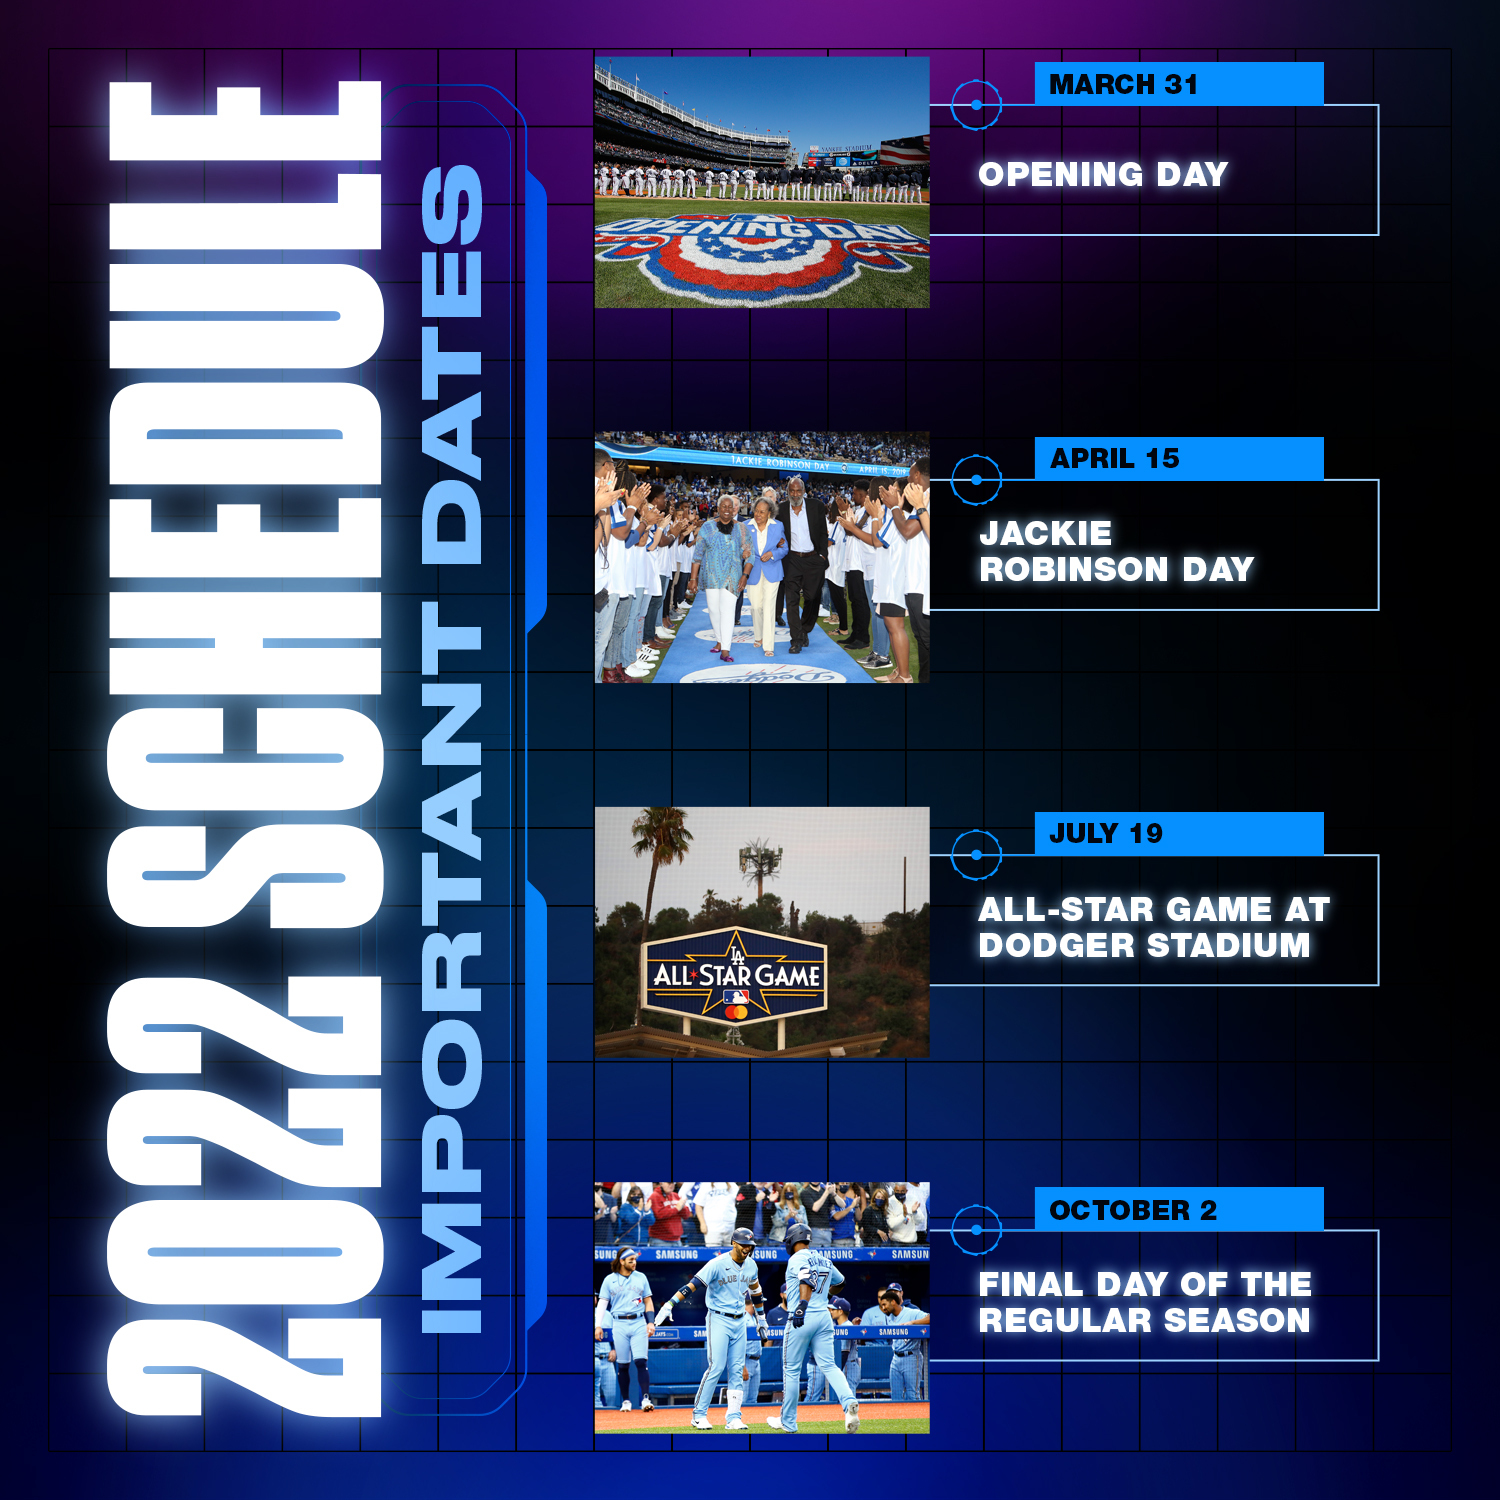 Mlb 2022 Regular Season Schedule Mlb On Twitter: "The 2022 Schedule Is Out! Mark Your Calendar Accordingly.  ⬇️ Https://T.co/By19Zgwwbu" / Twitter